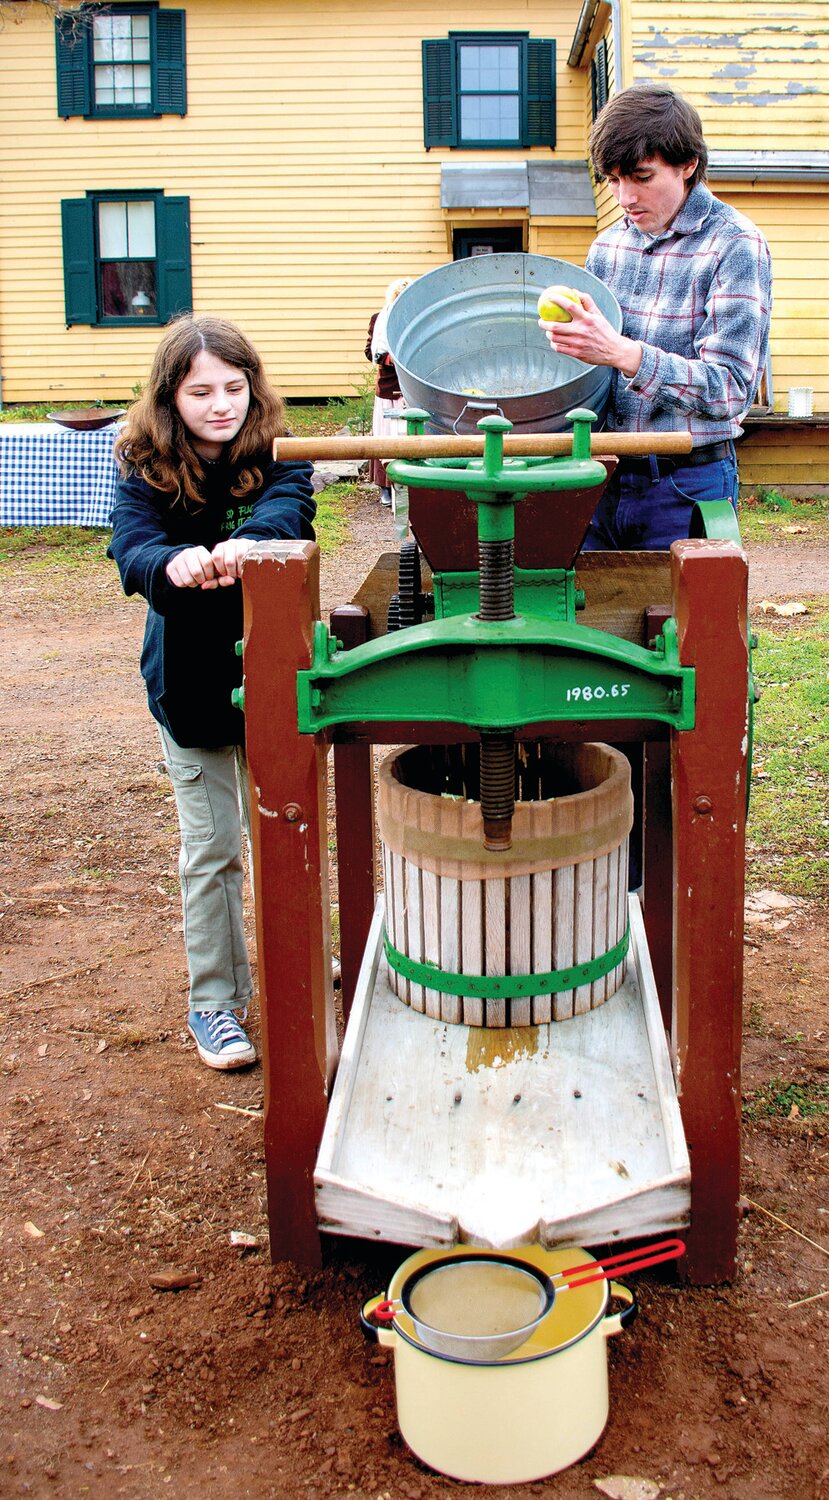 Visitors crank the apple cider press and add apples to the hopper at Howell Living History Farm.